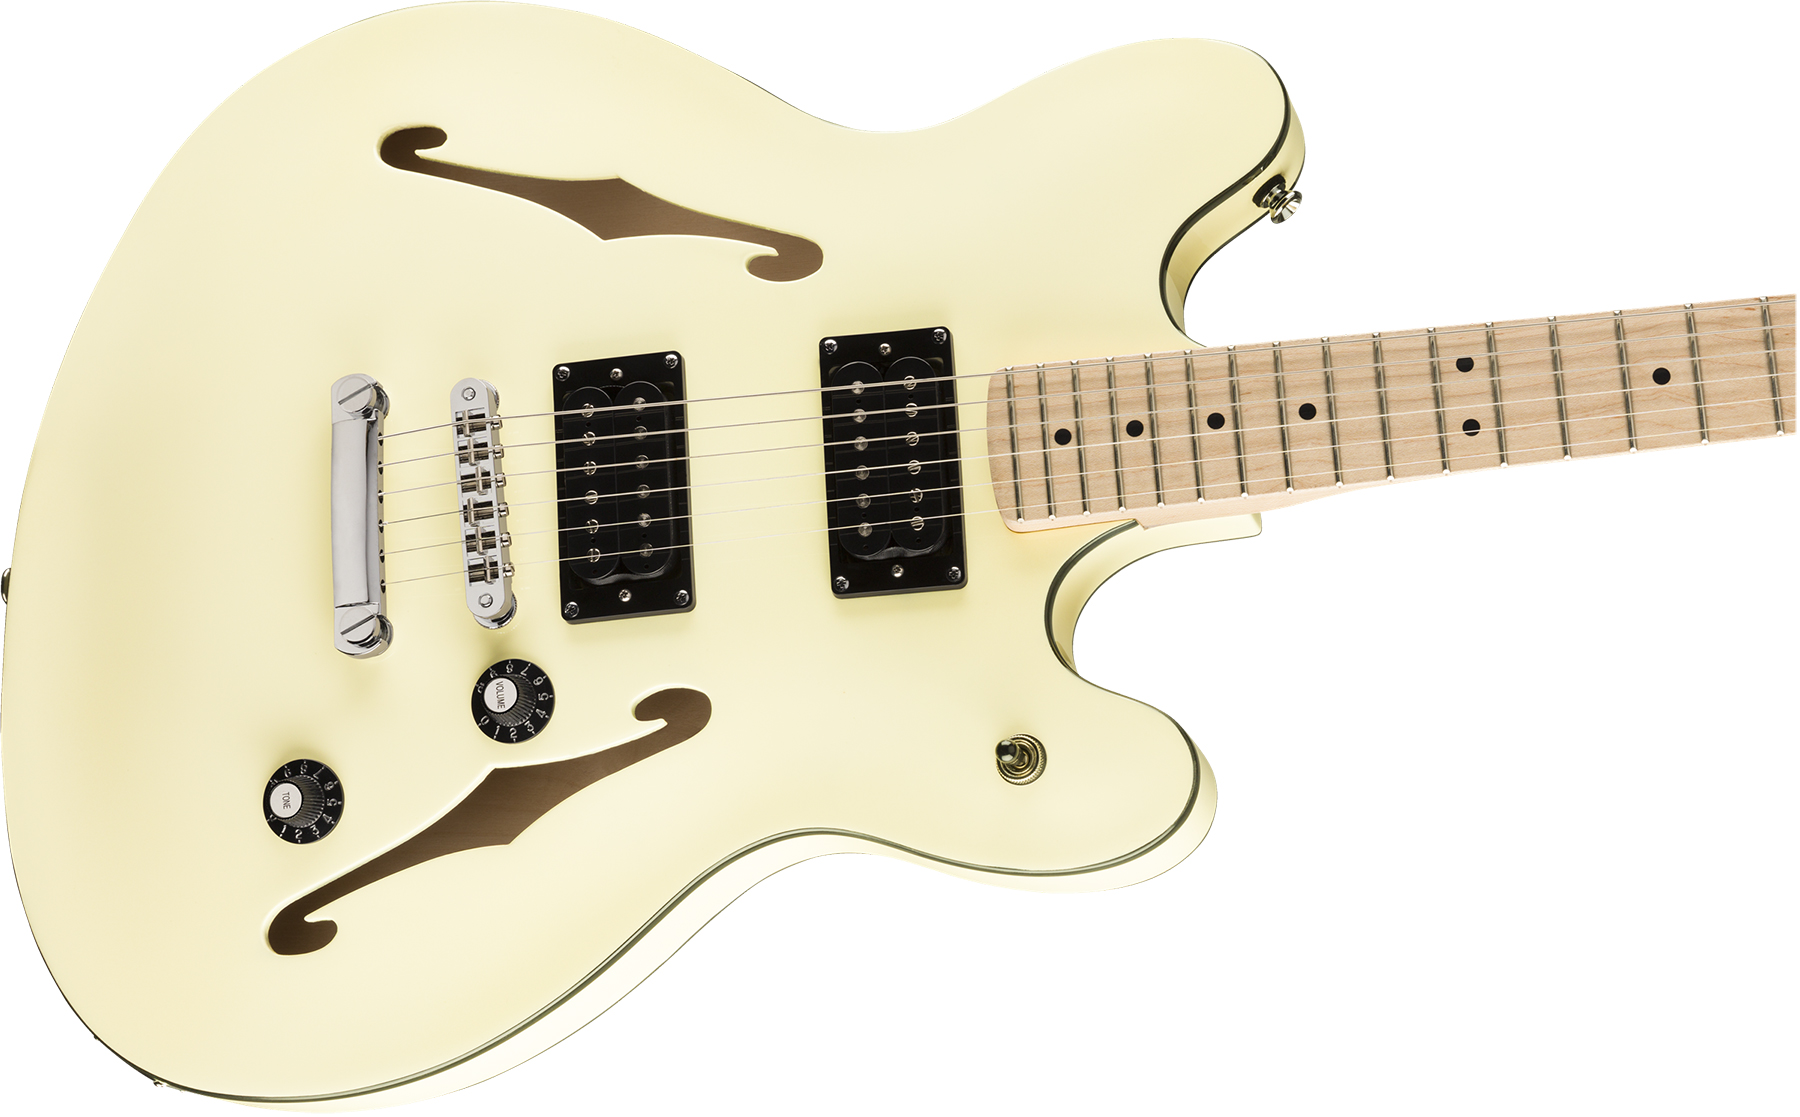 Squier Starcaster Affinity 2019 Hh Ht Mn - Olympic White - Guitarra electrica retro rock - Variation 2